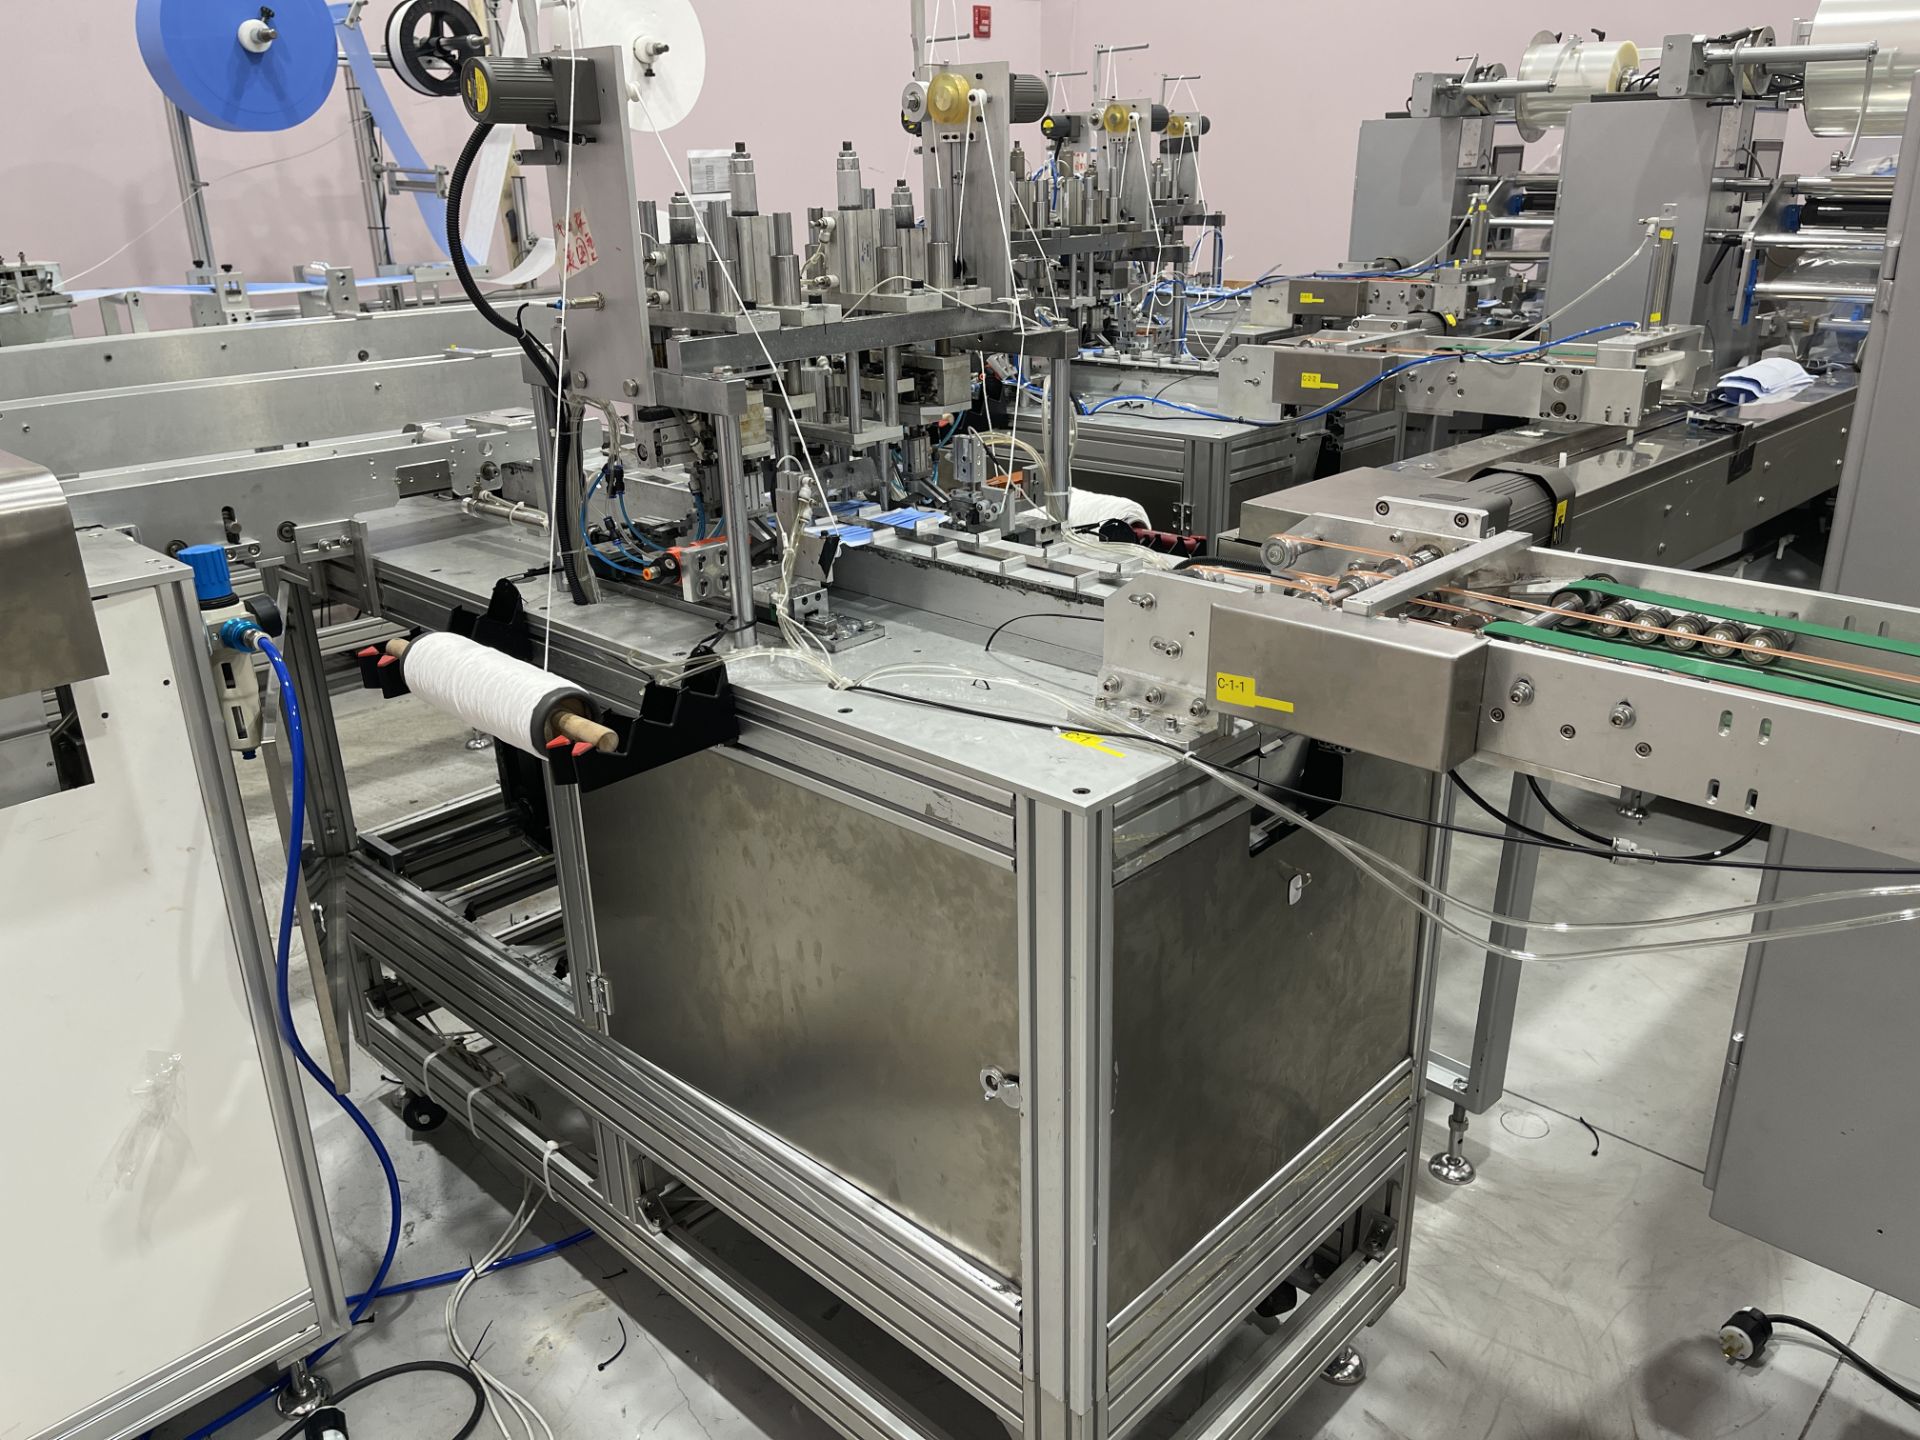 COMPLETE PACKAGE: 2020 3-Ply Disposable Medical Mask Assembly & Packaging Line Equipment, Includes: - Image 92 of 150